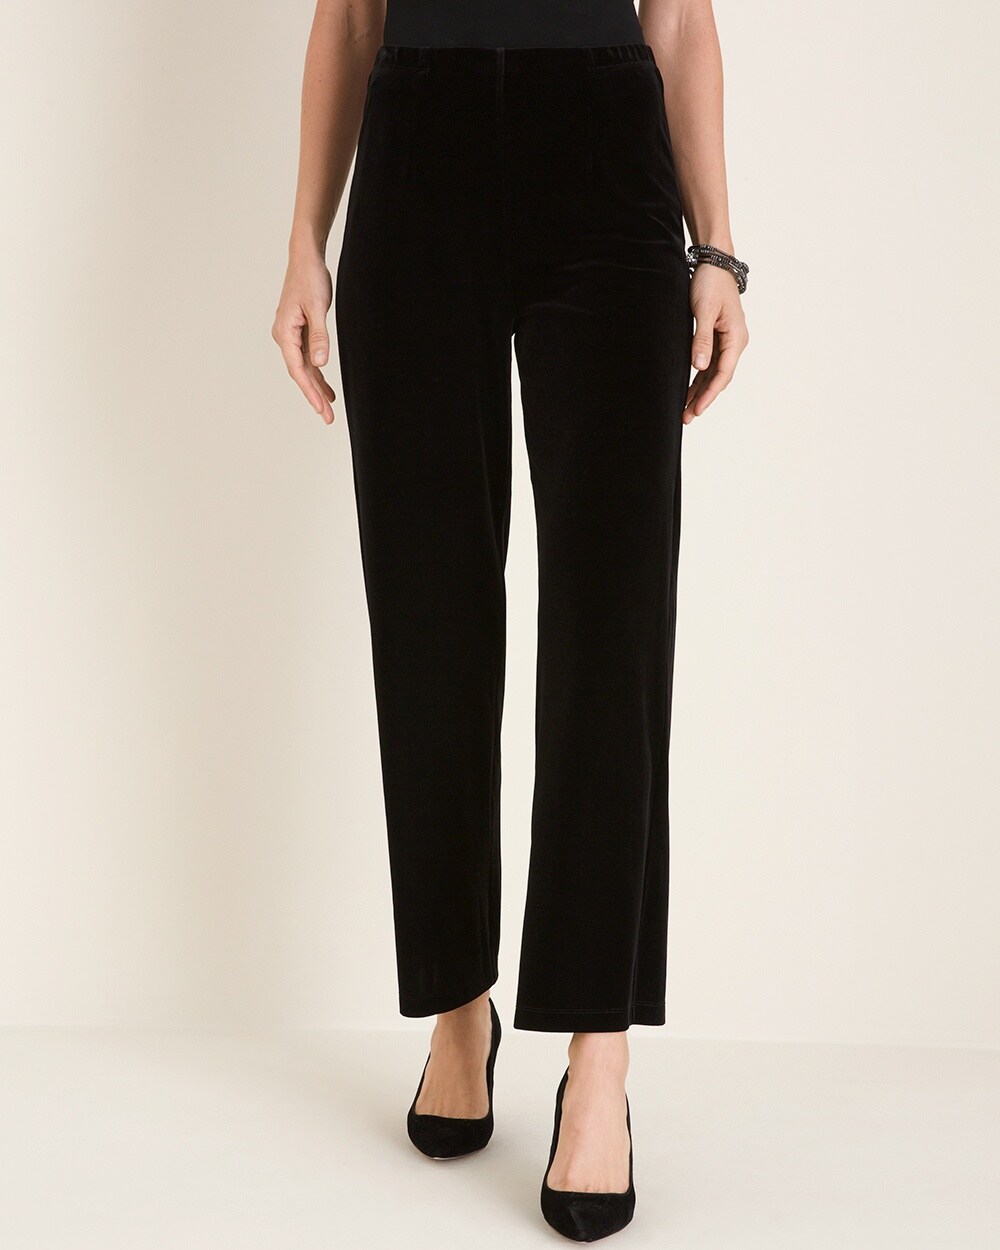 Travelers Collection Velvet Essential Slim Ankle Pants - Chico's